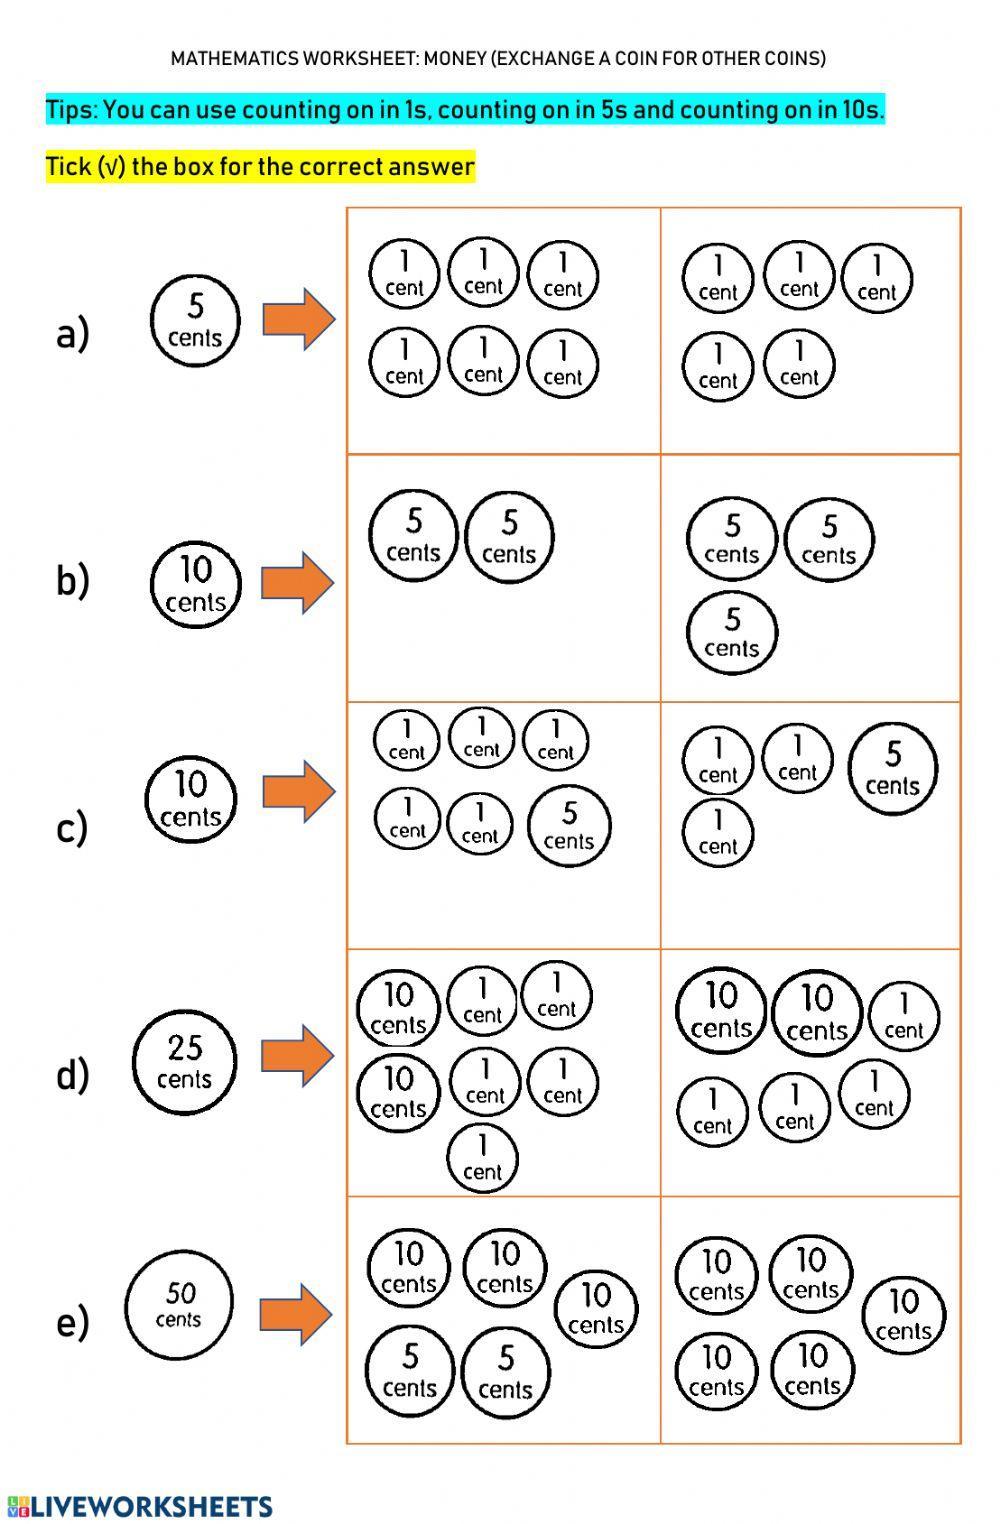 Worksheet 9 EXCHANGE A COIN FOR OTHER COINS